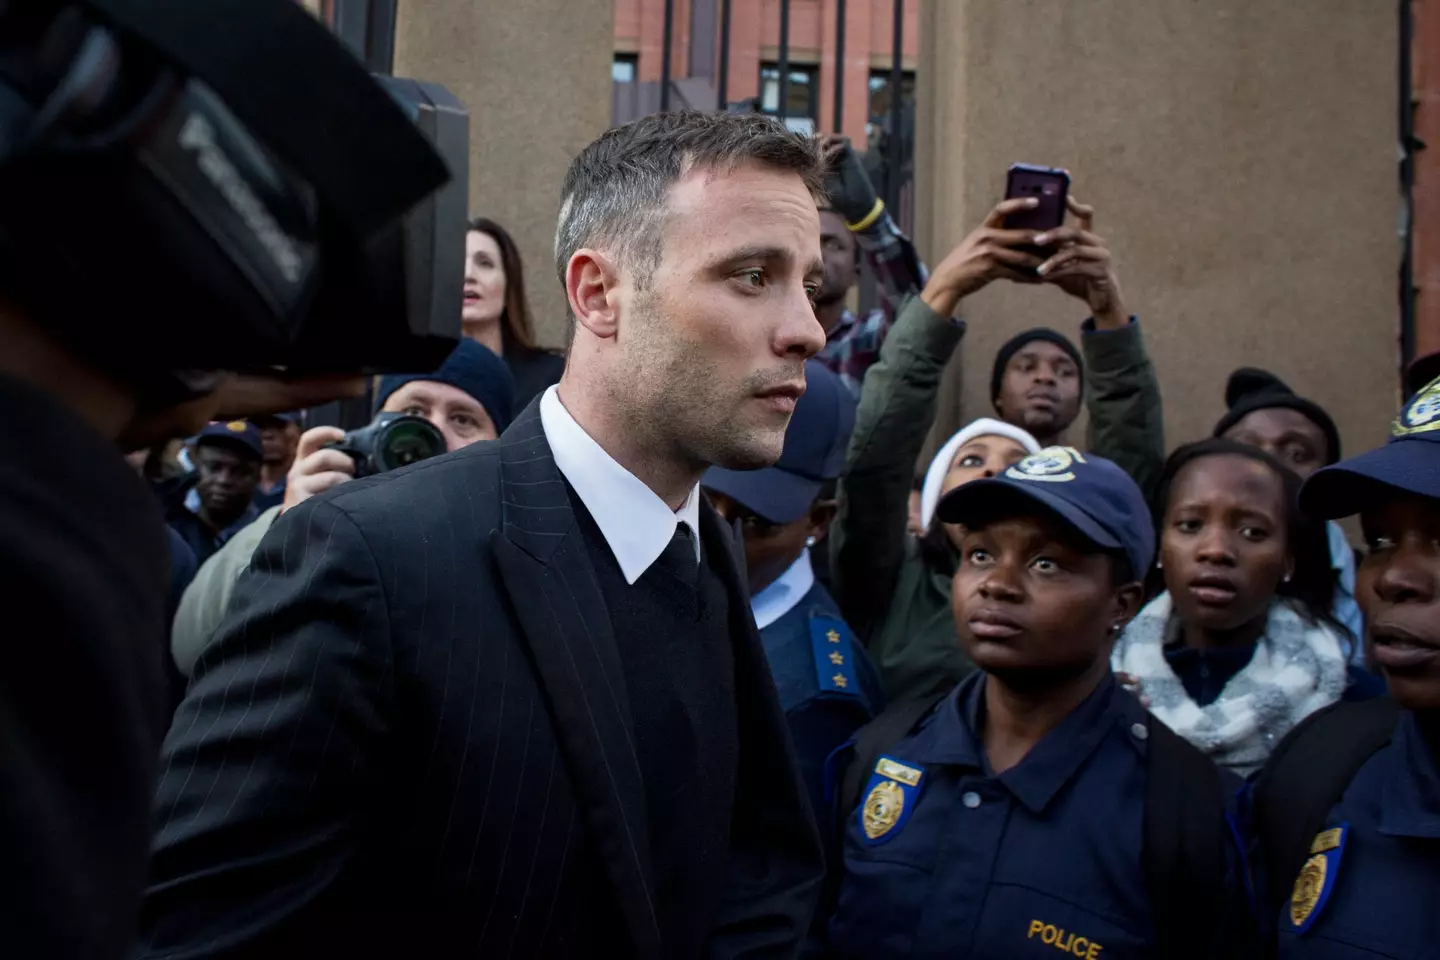 Pistorius now faces a parole hearing which might see him released from prison.